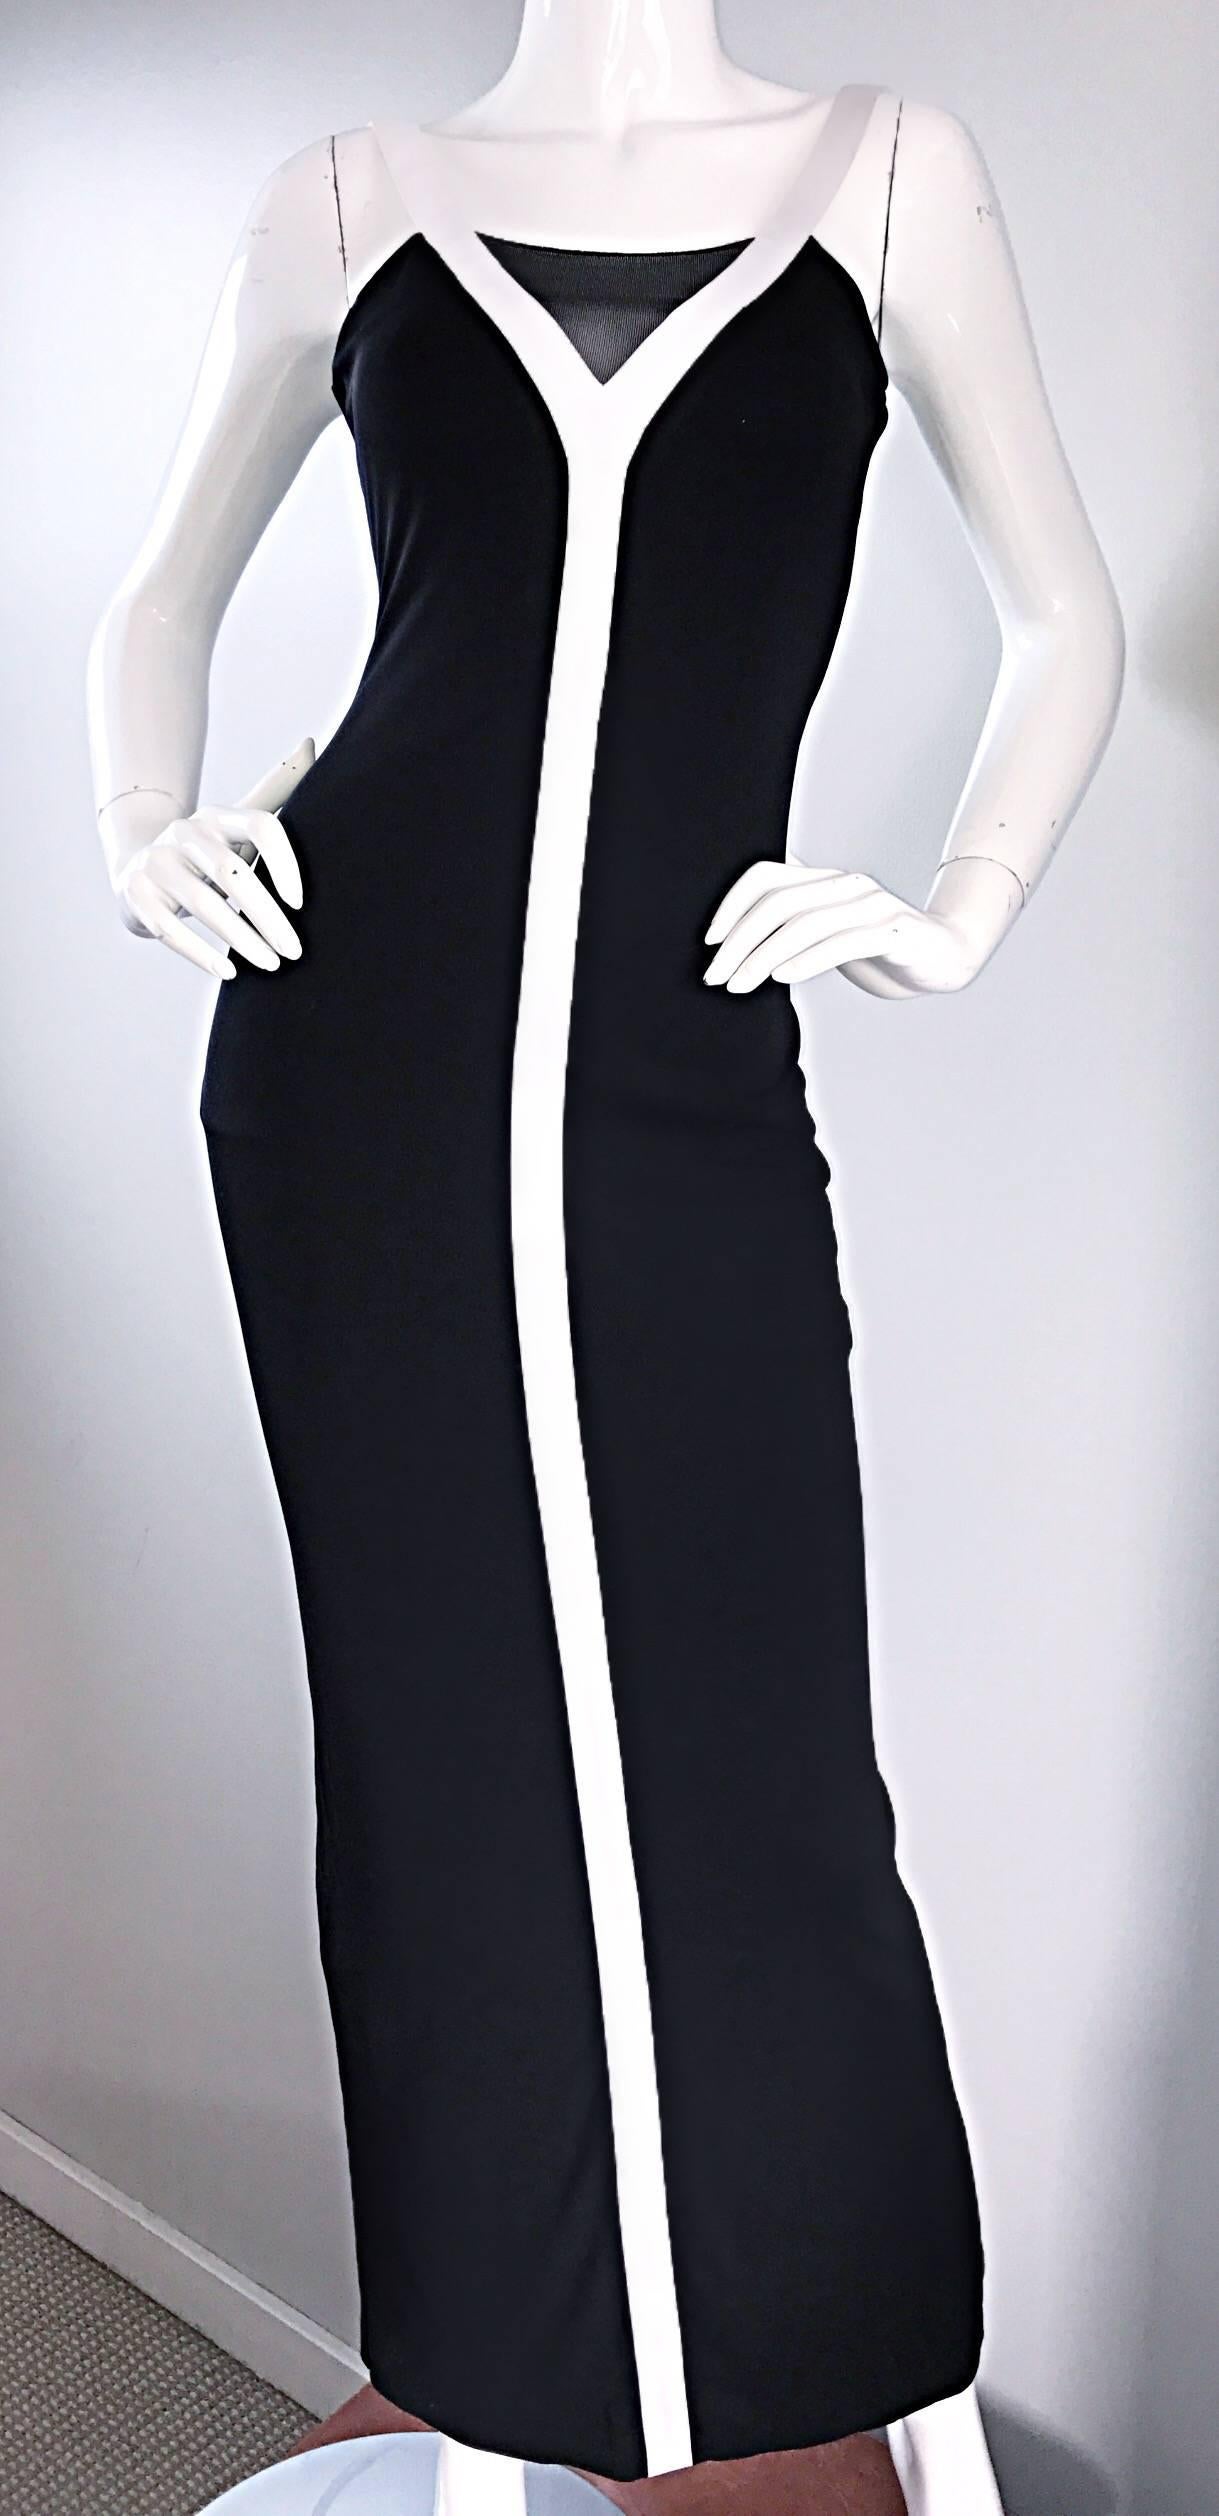 Dolce & Gabbana 1990s Vintage Black and White Iconic Jersey Dress Gown Dress For Sale 1